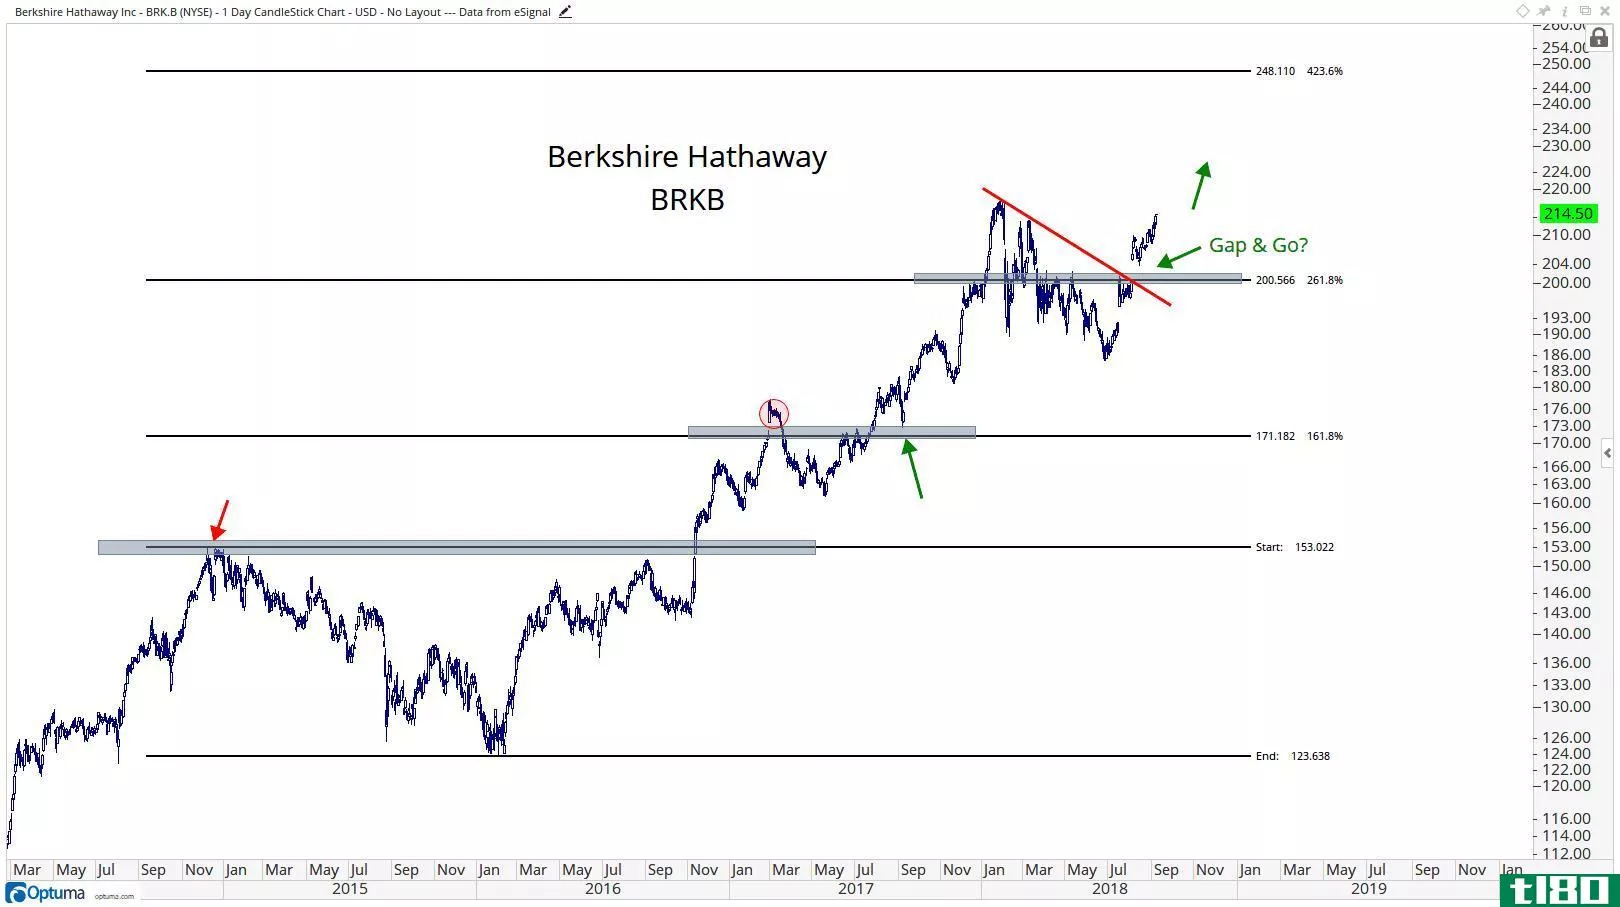 Technical chart showing the performance of Berkshire Hathaway Inc. (BRK.B)